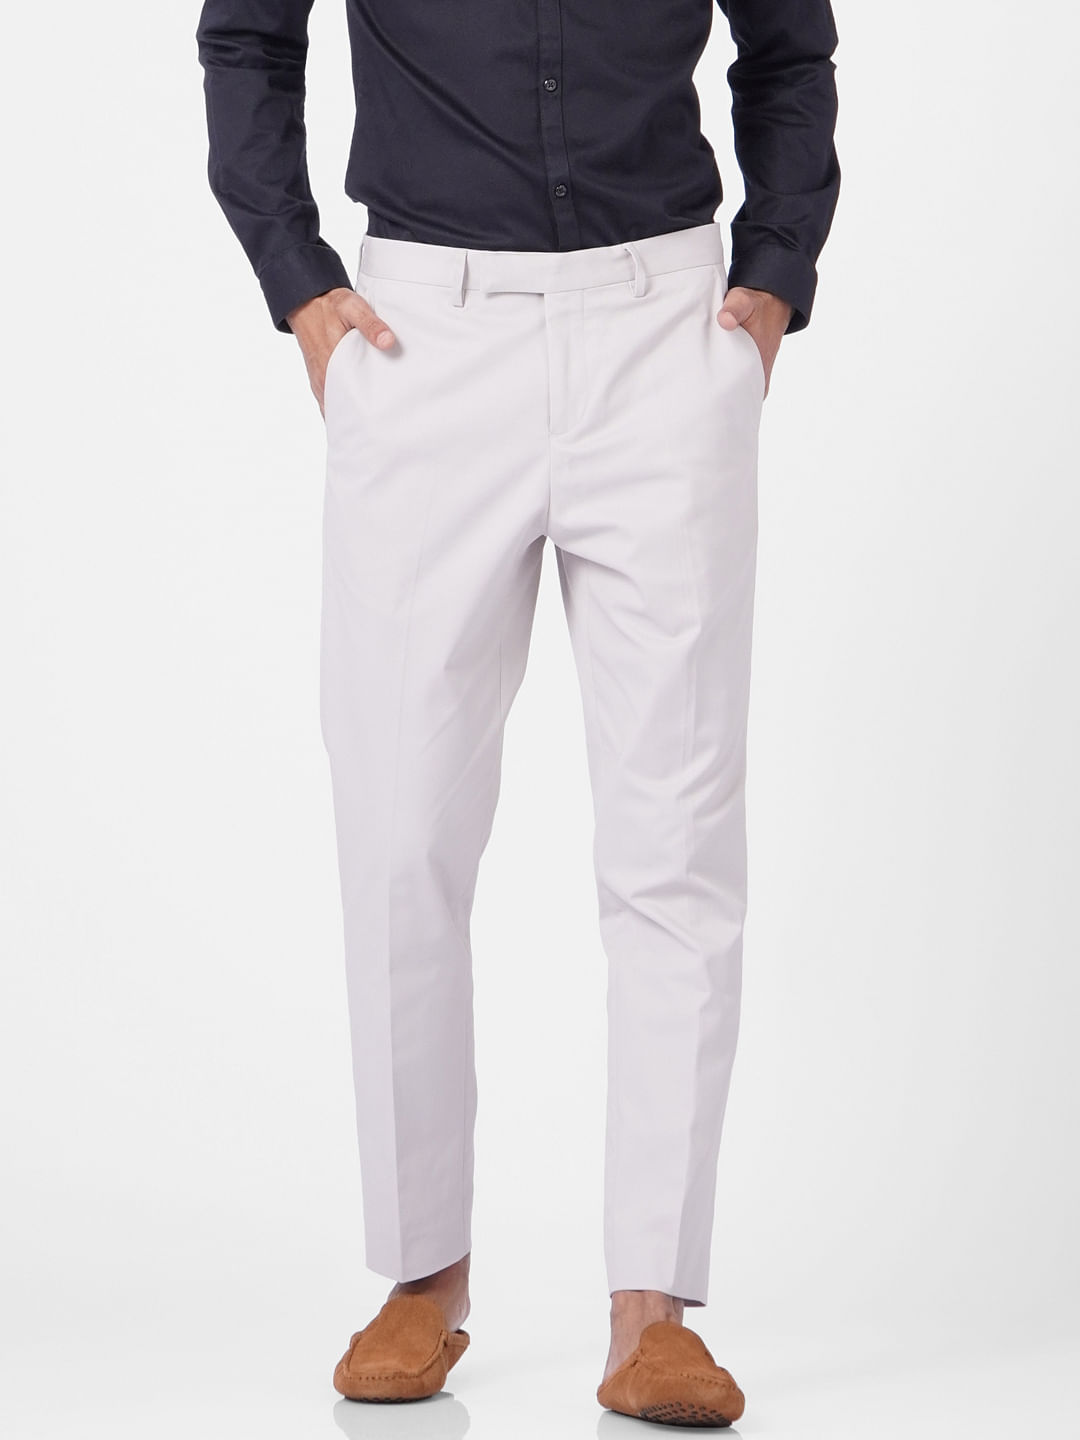 Mens Natural Herringbone Tailored Fit Linen Trousers  1913 Collection   Hawes and Curtis